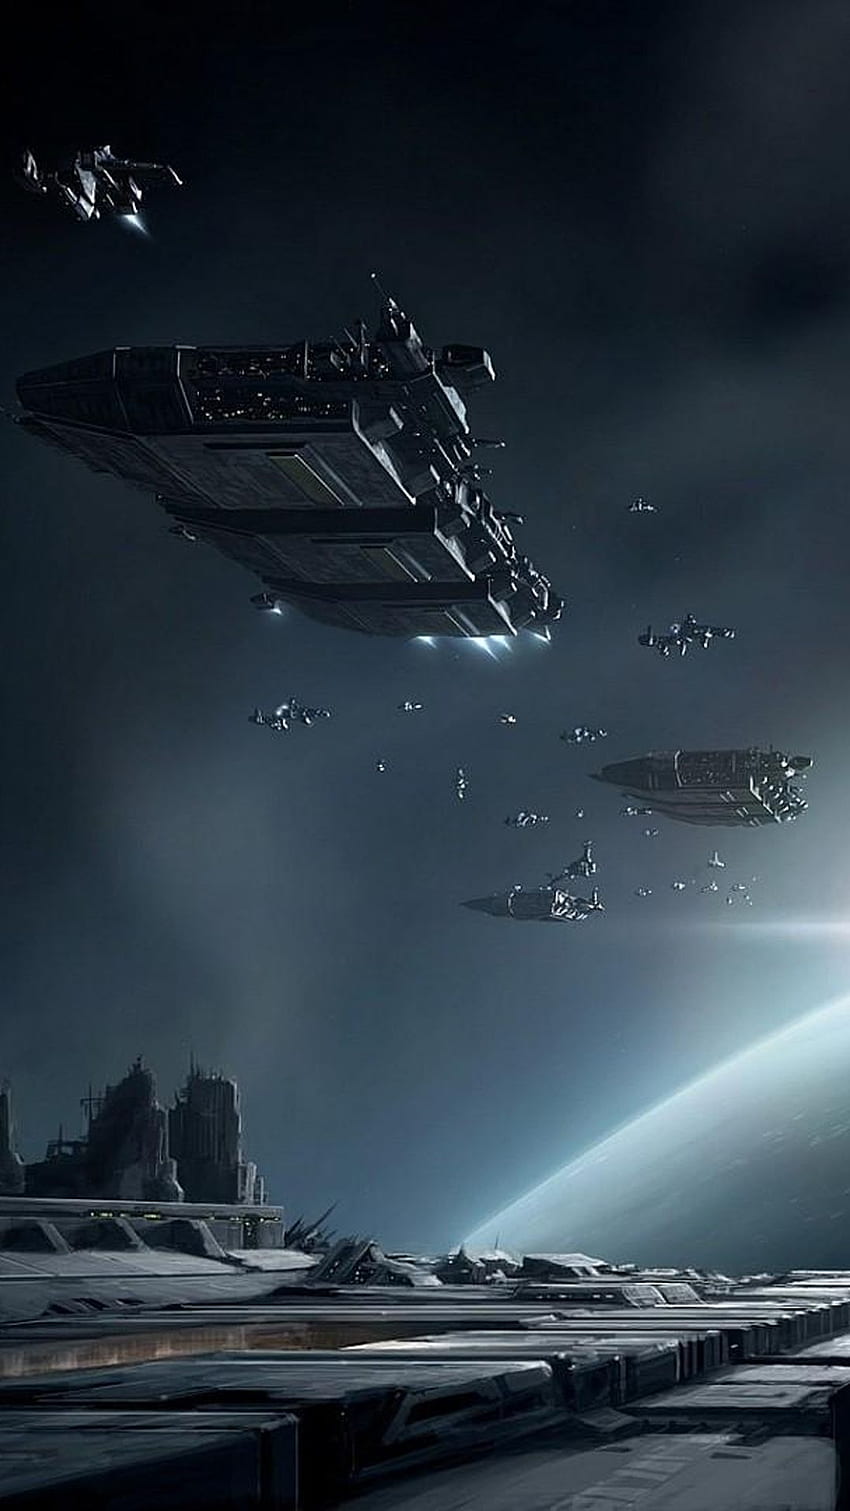 EVE Online Space Battle Game 4K Wallpaper iPhone HD Phone #5480i